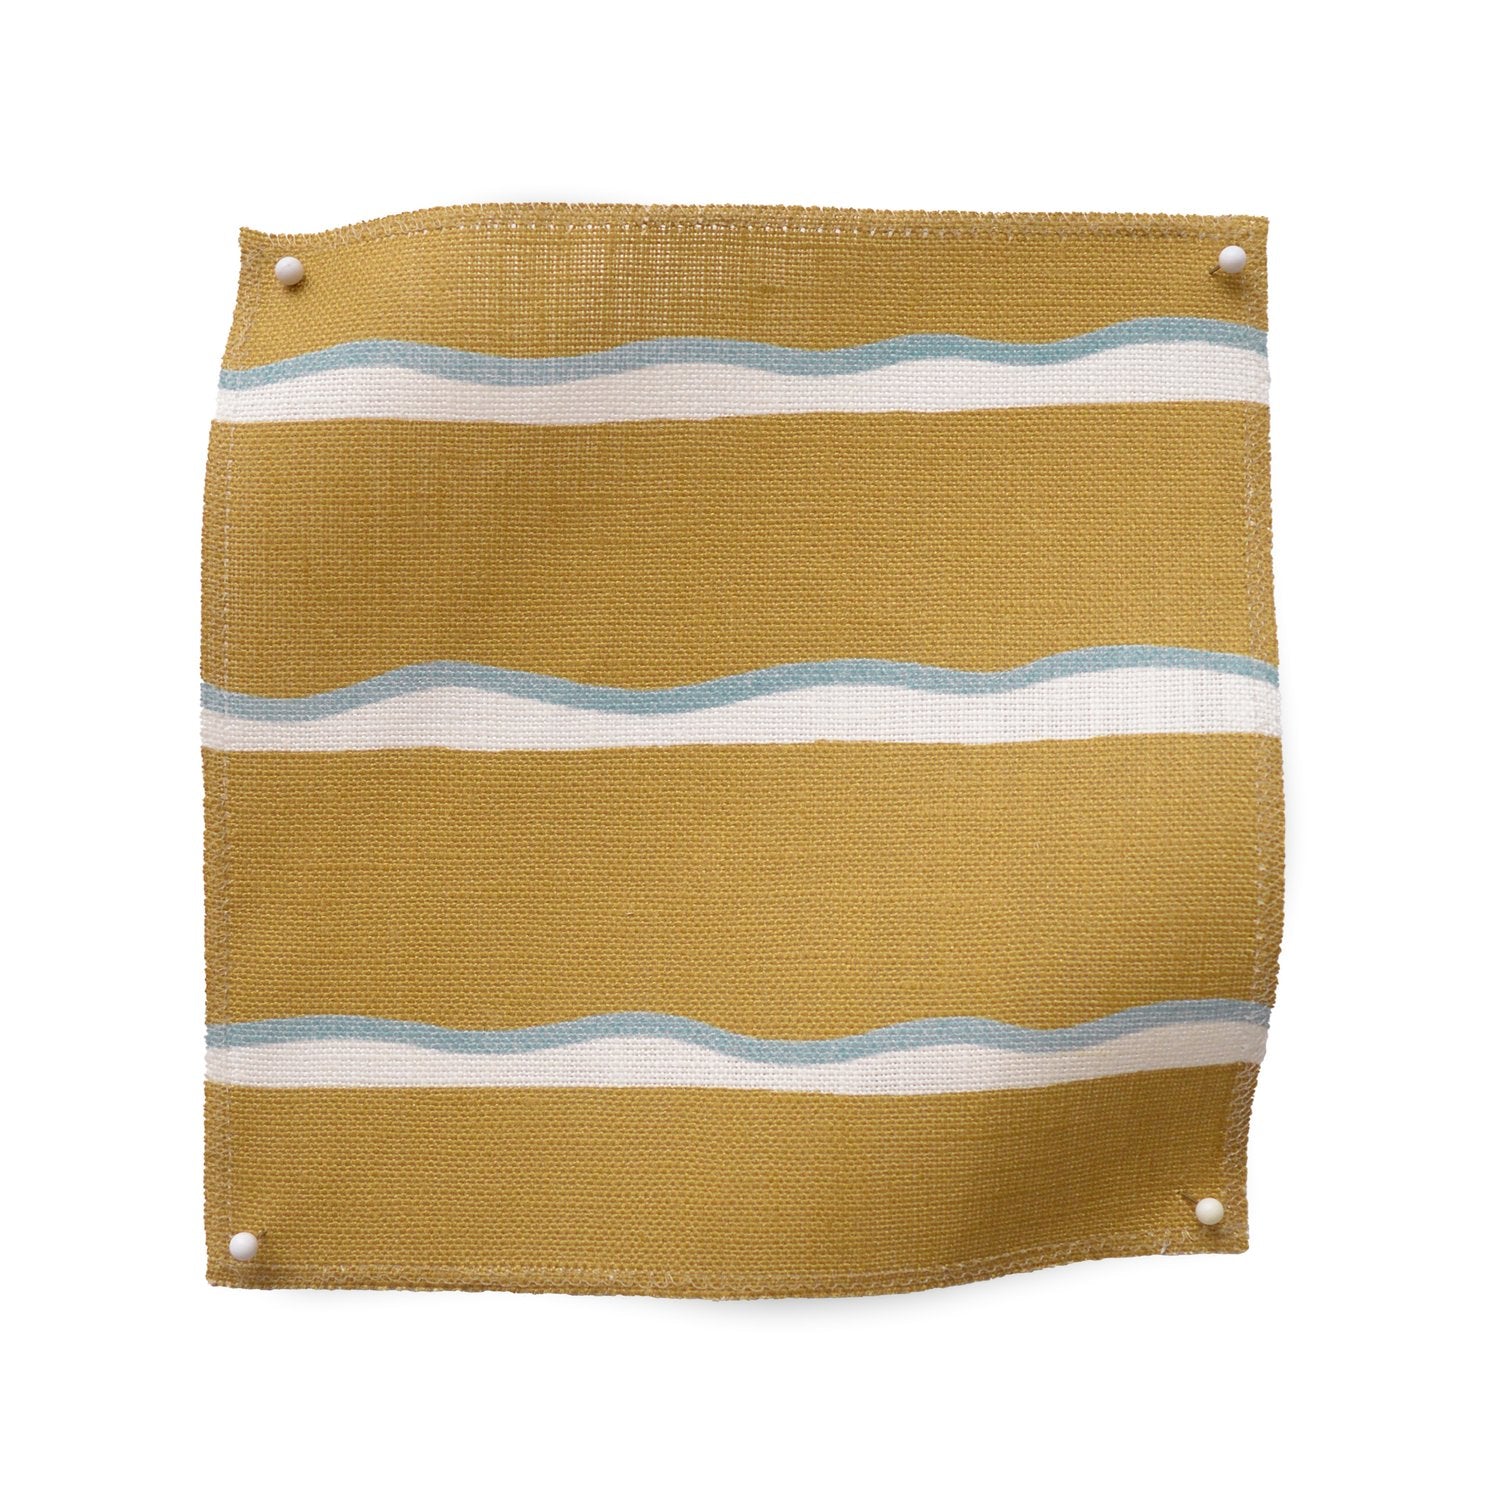 Square fabric swatch in a wide undulating stripe pattern in light blue and white on a gold field.